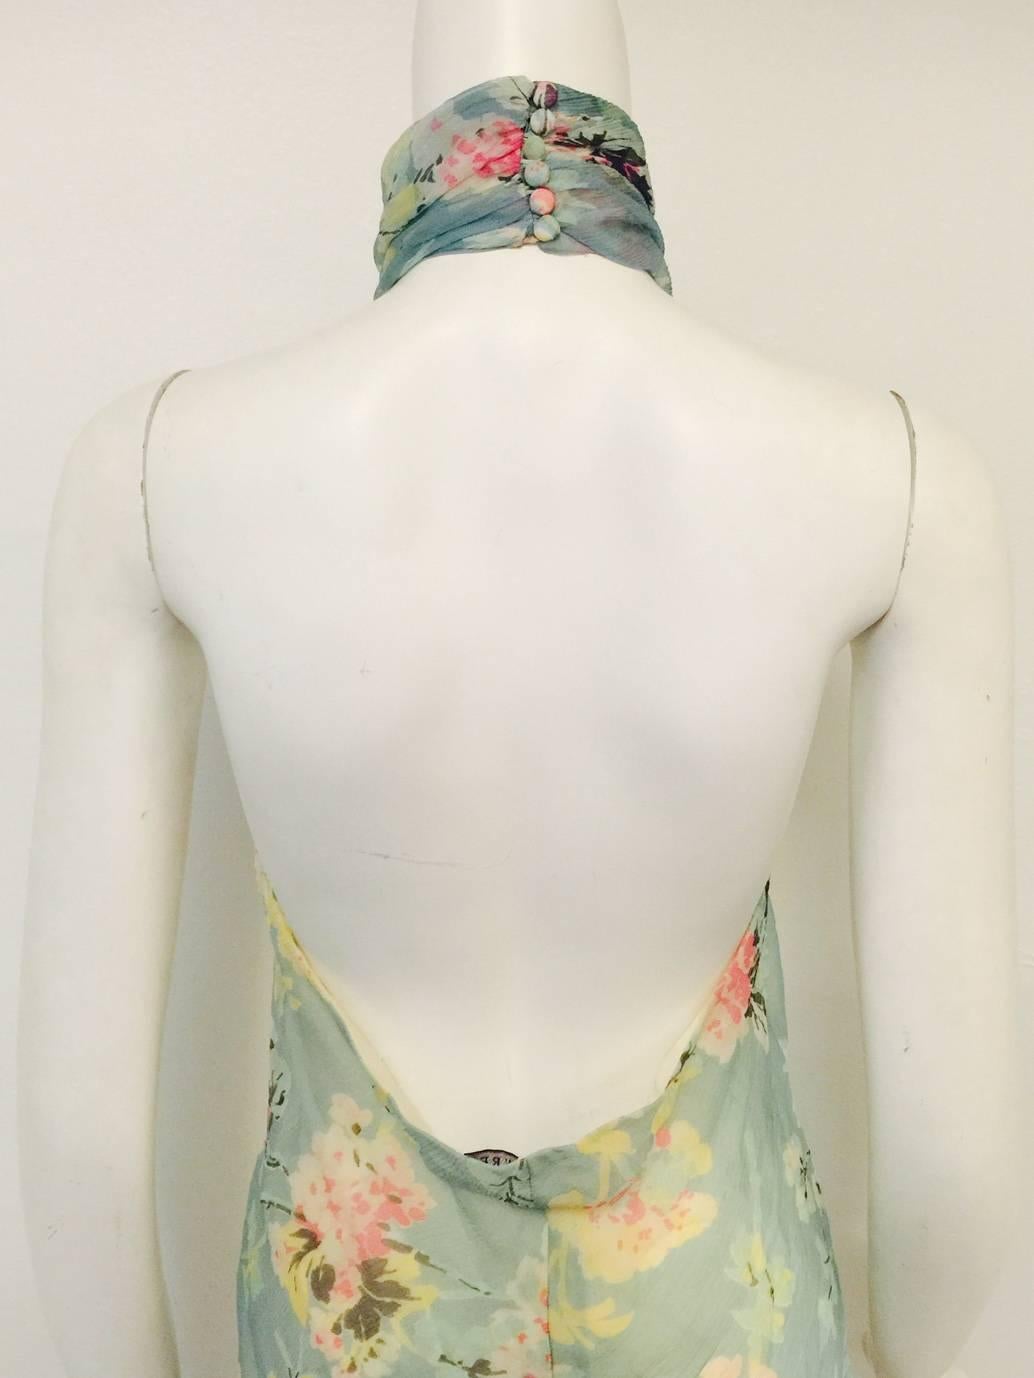 Ralph Lauren Collection Floral Print Silk Bias Cut Halter Dress With Ruffles  In Excellent Condition For Sale In Palm Beach, FL